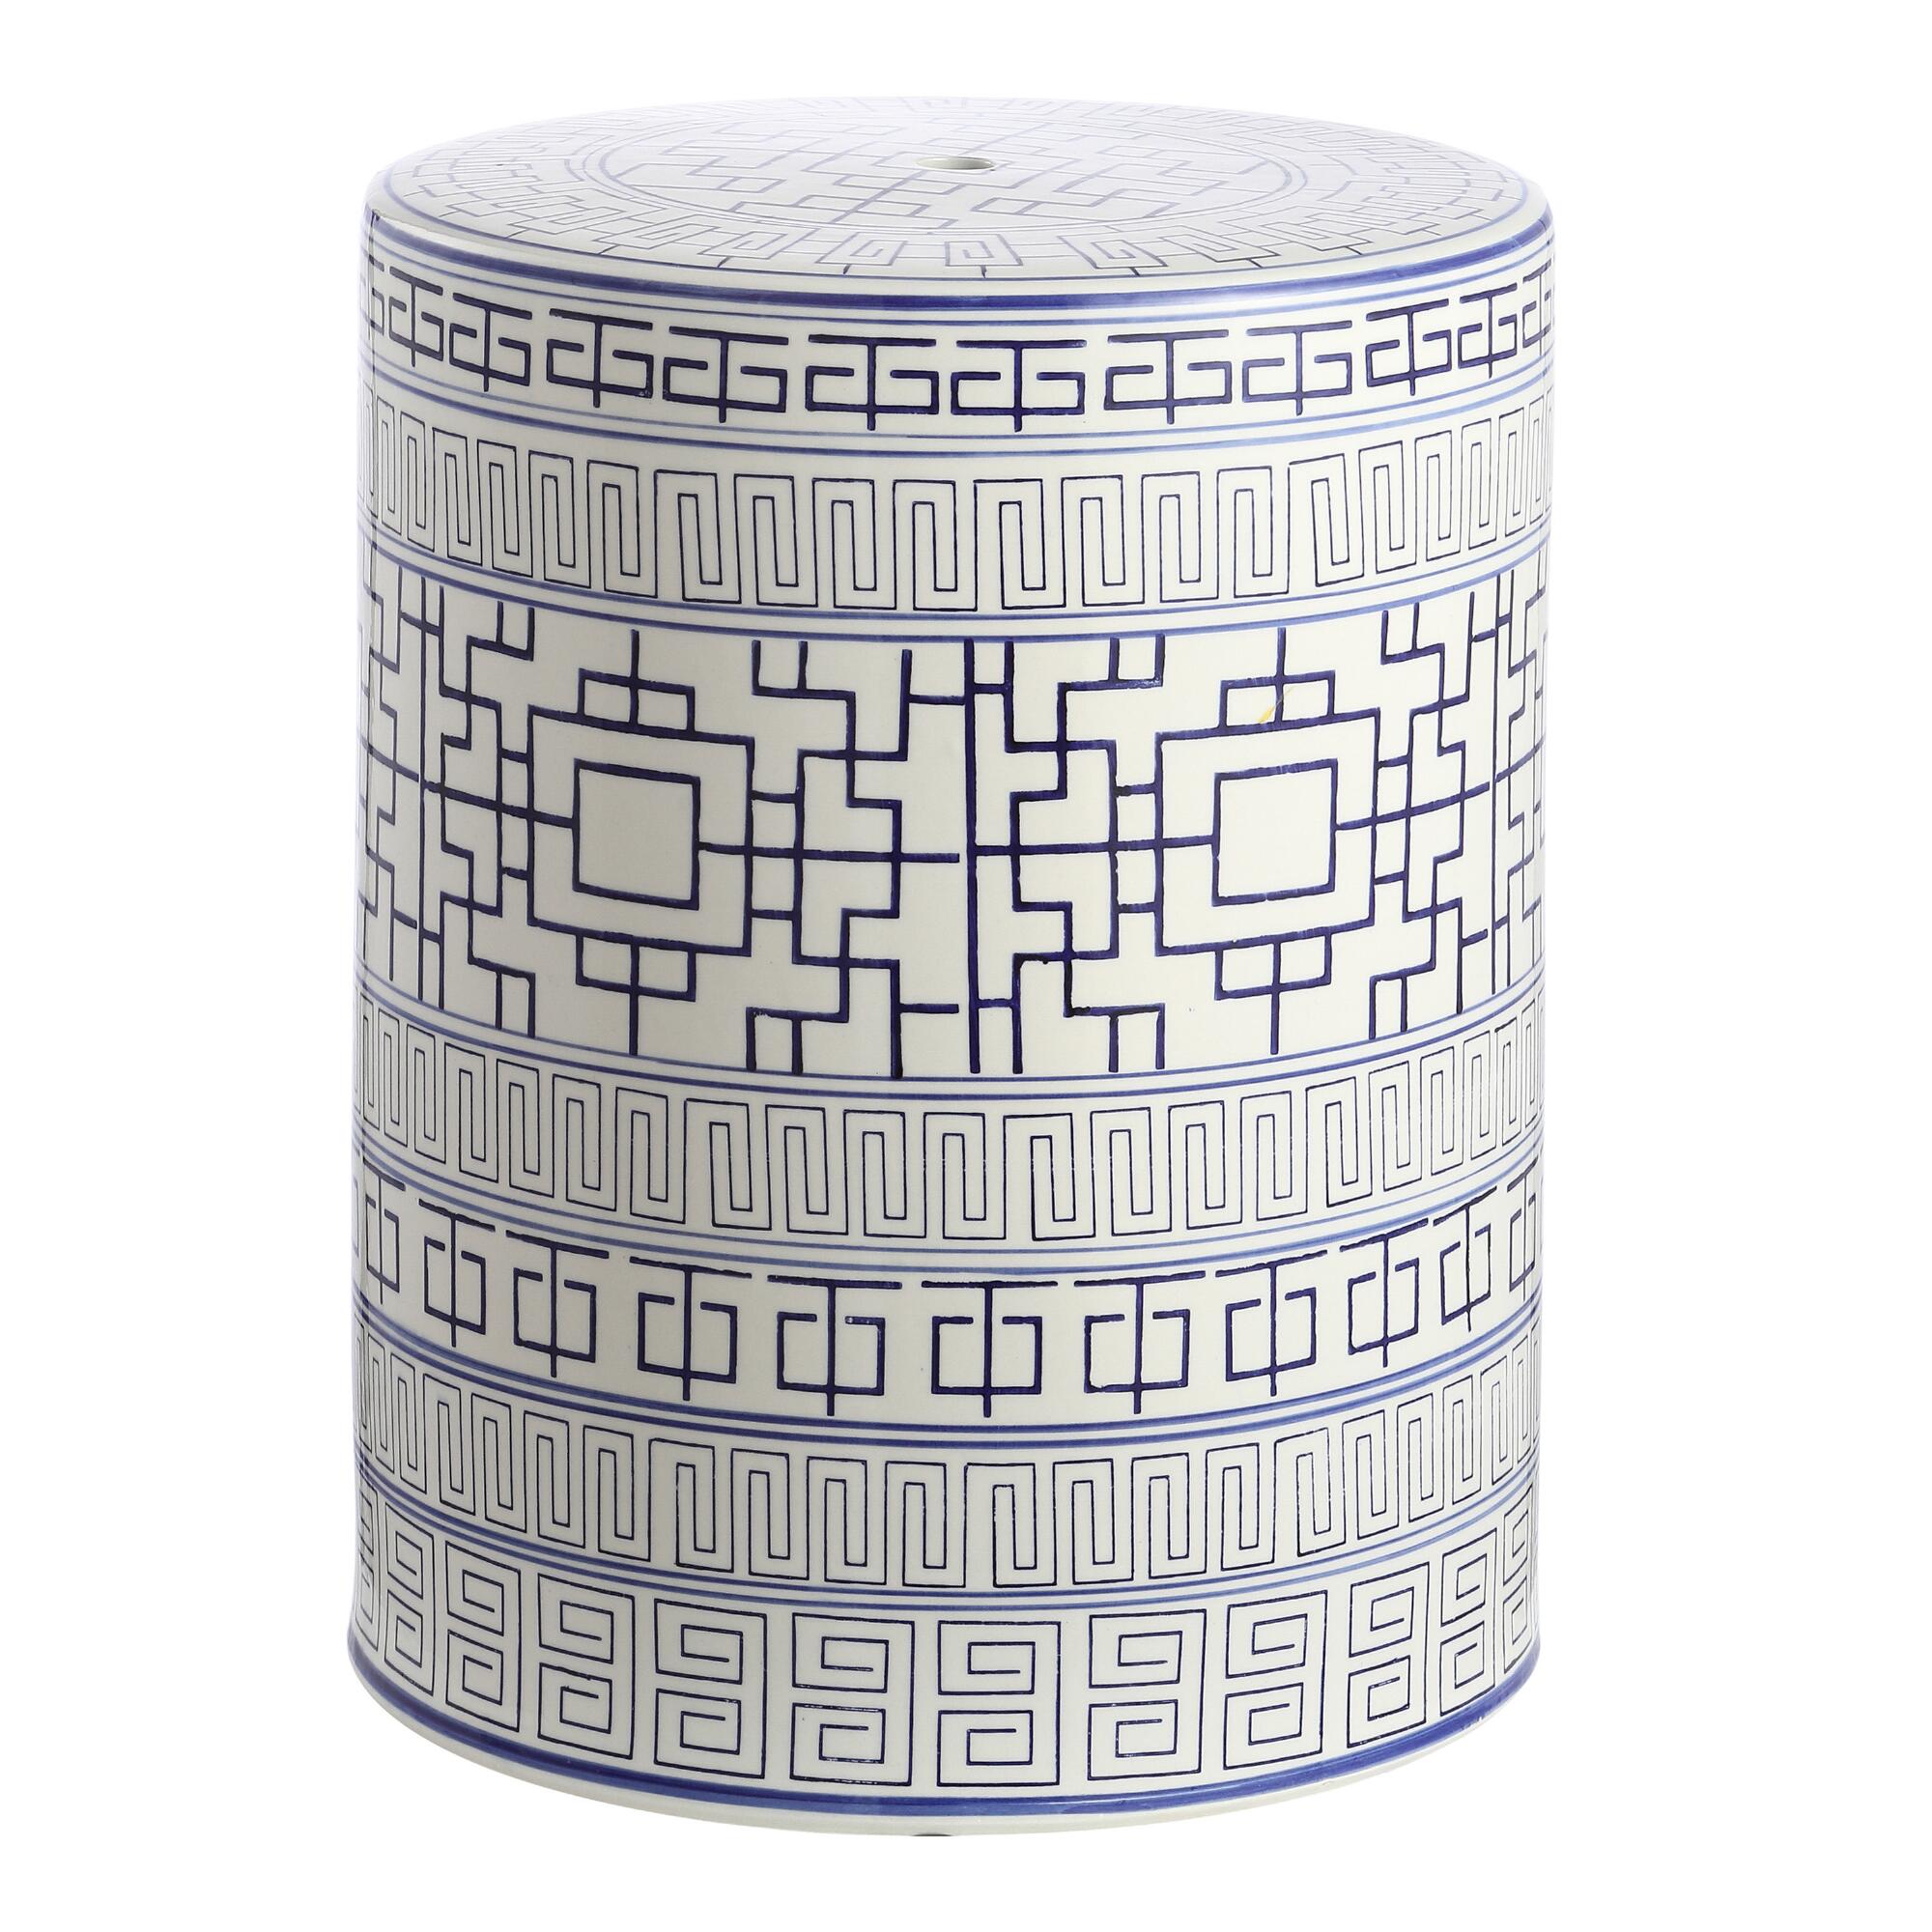 Navy and White Ceramic Shantou Outdoor Patio Accent Stool: Blue/White by World Market